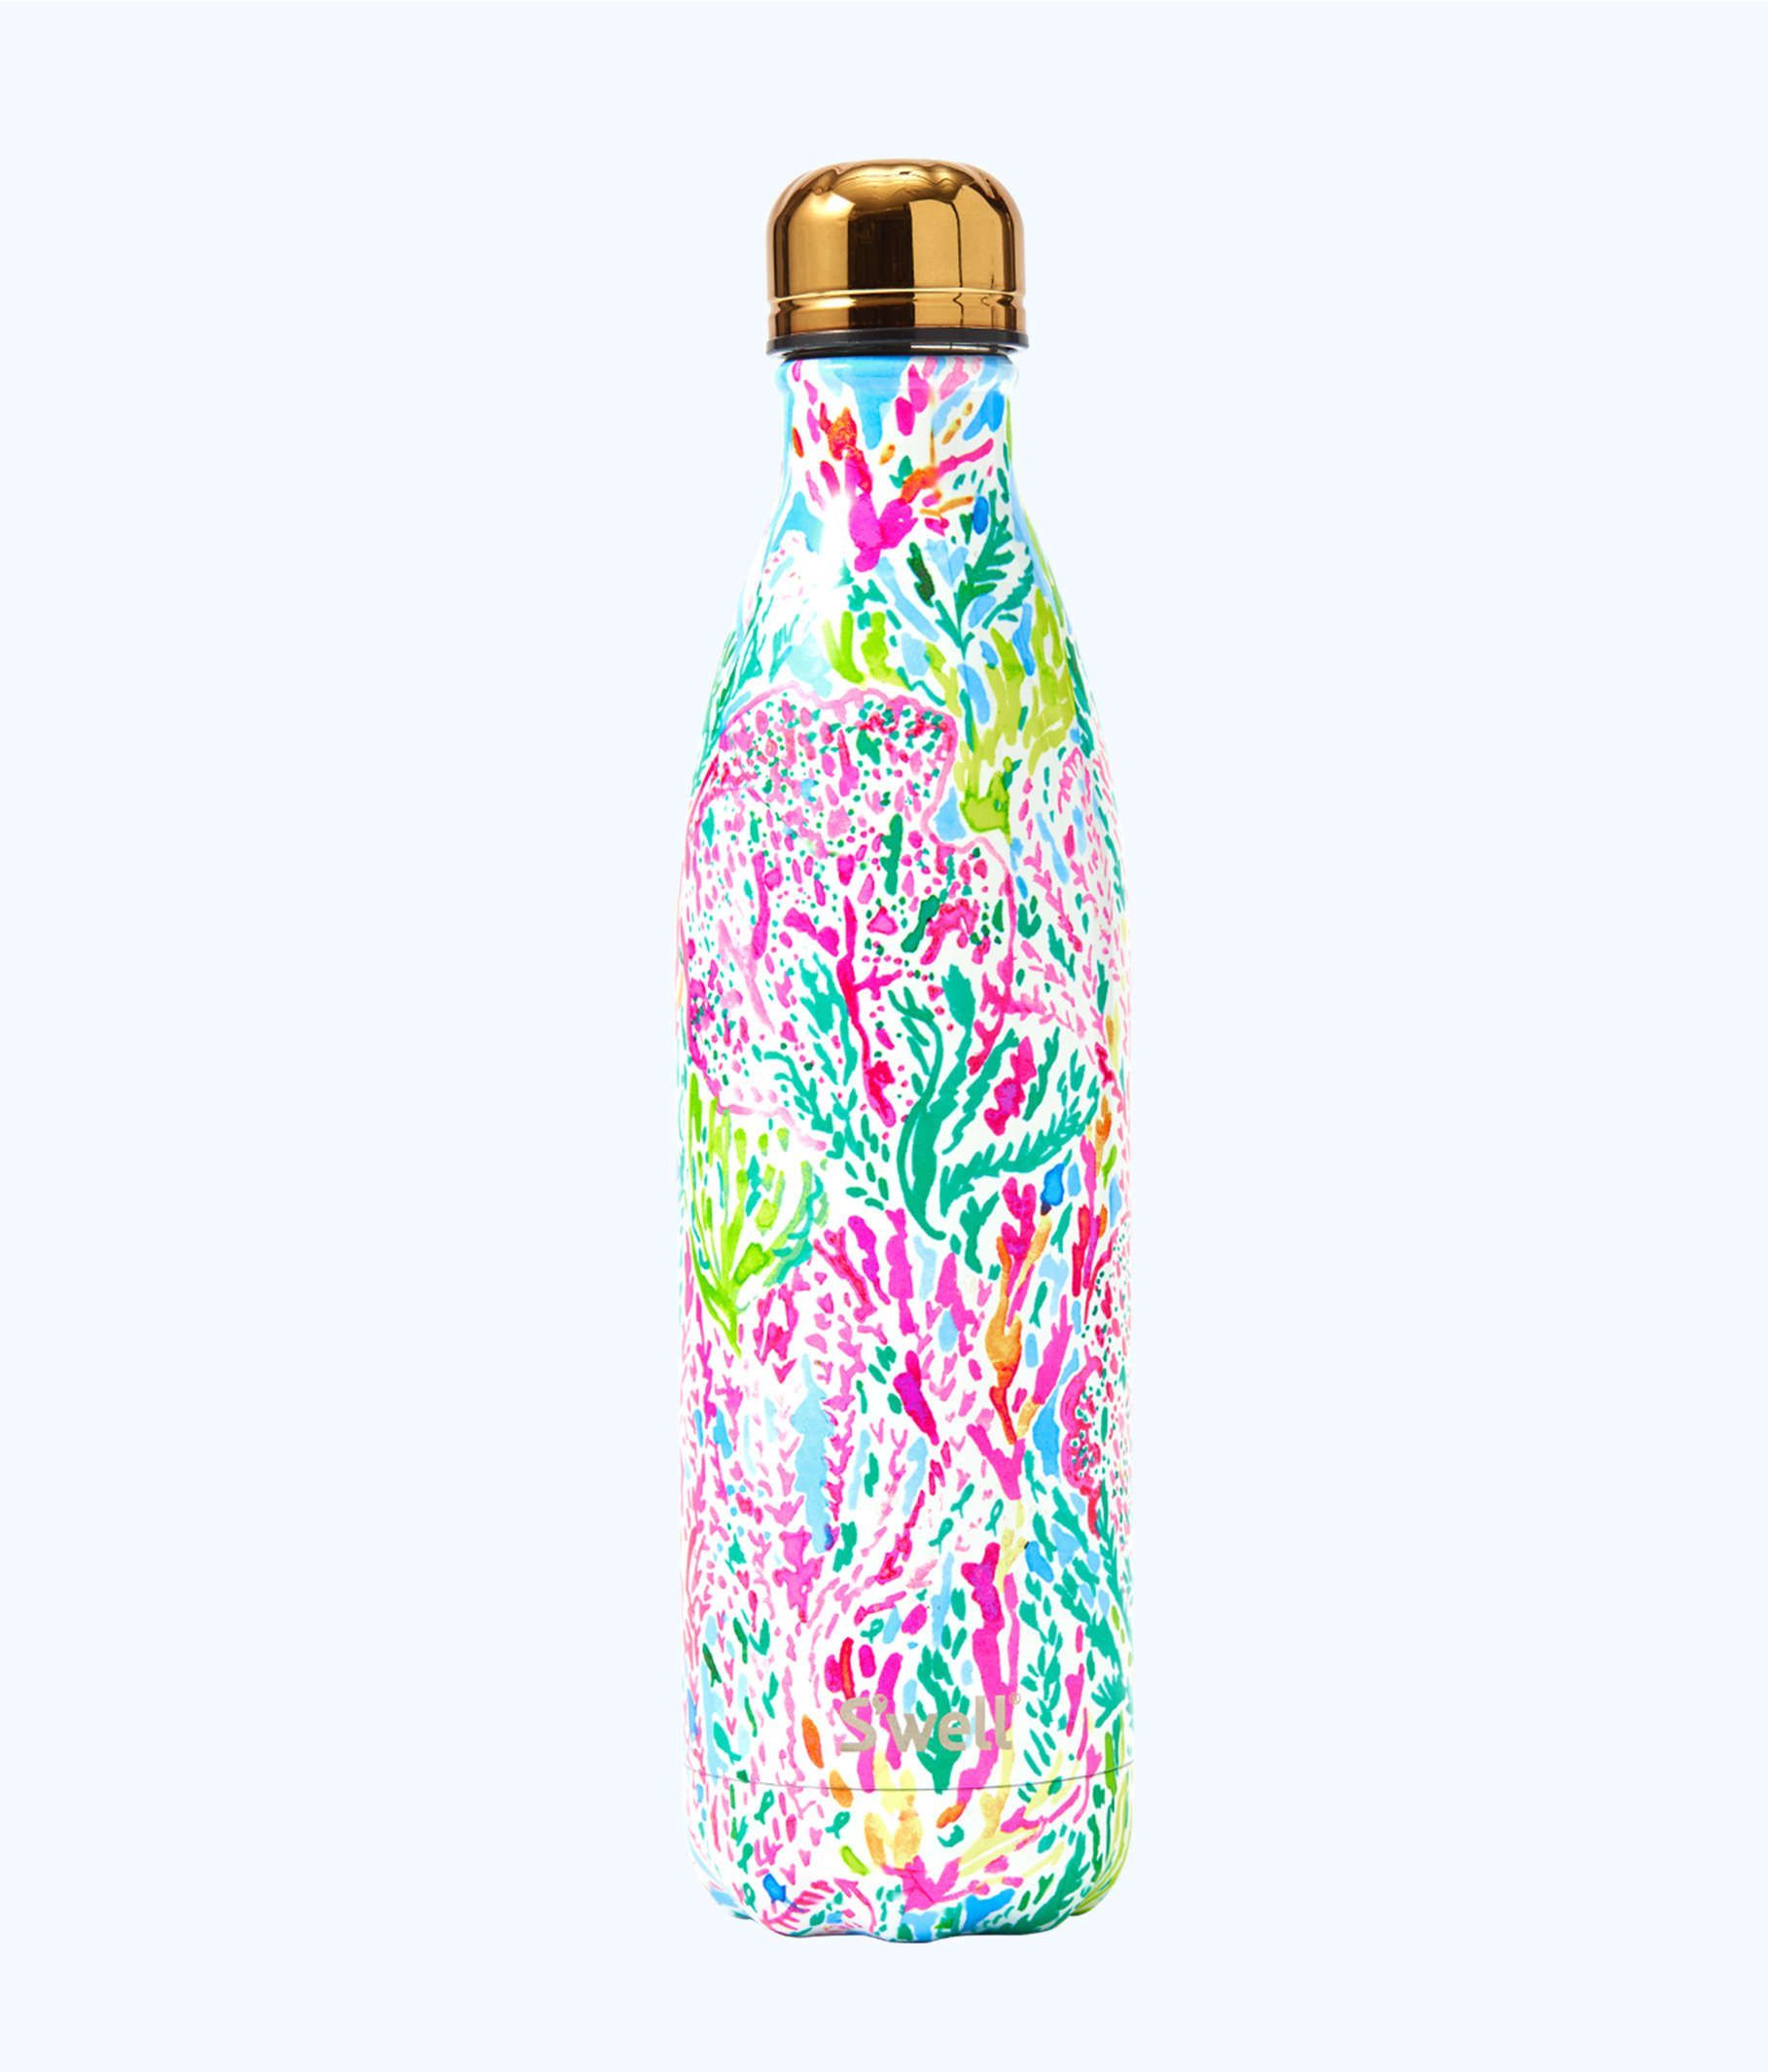 Lilly Pulitzer Is Offering an Incredible Deal on S'Well Water Bottles Today